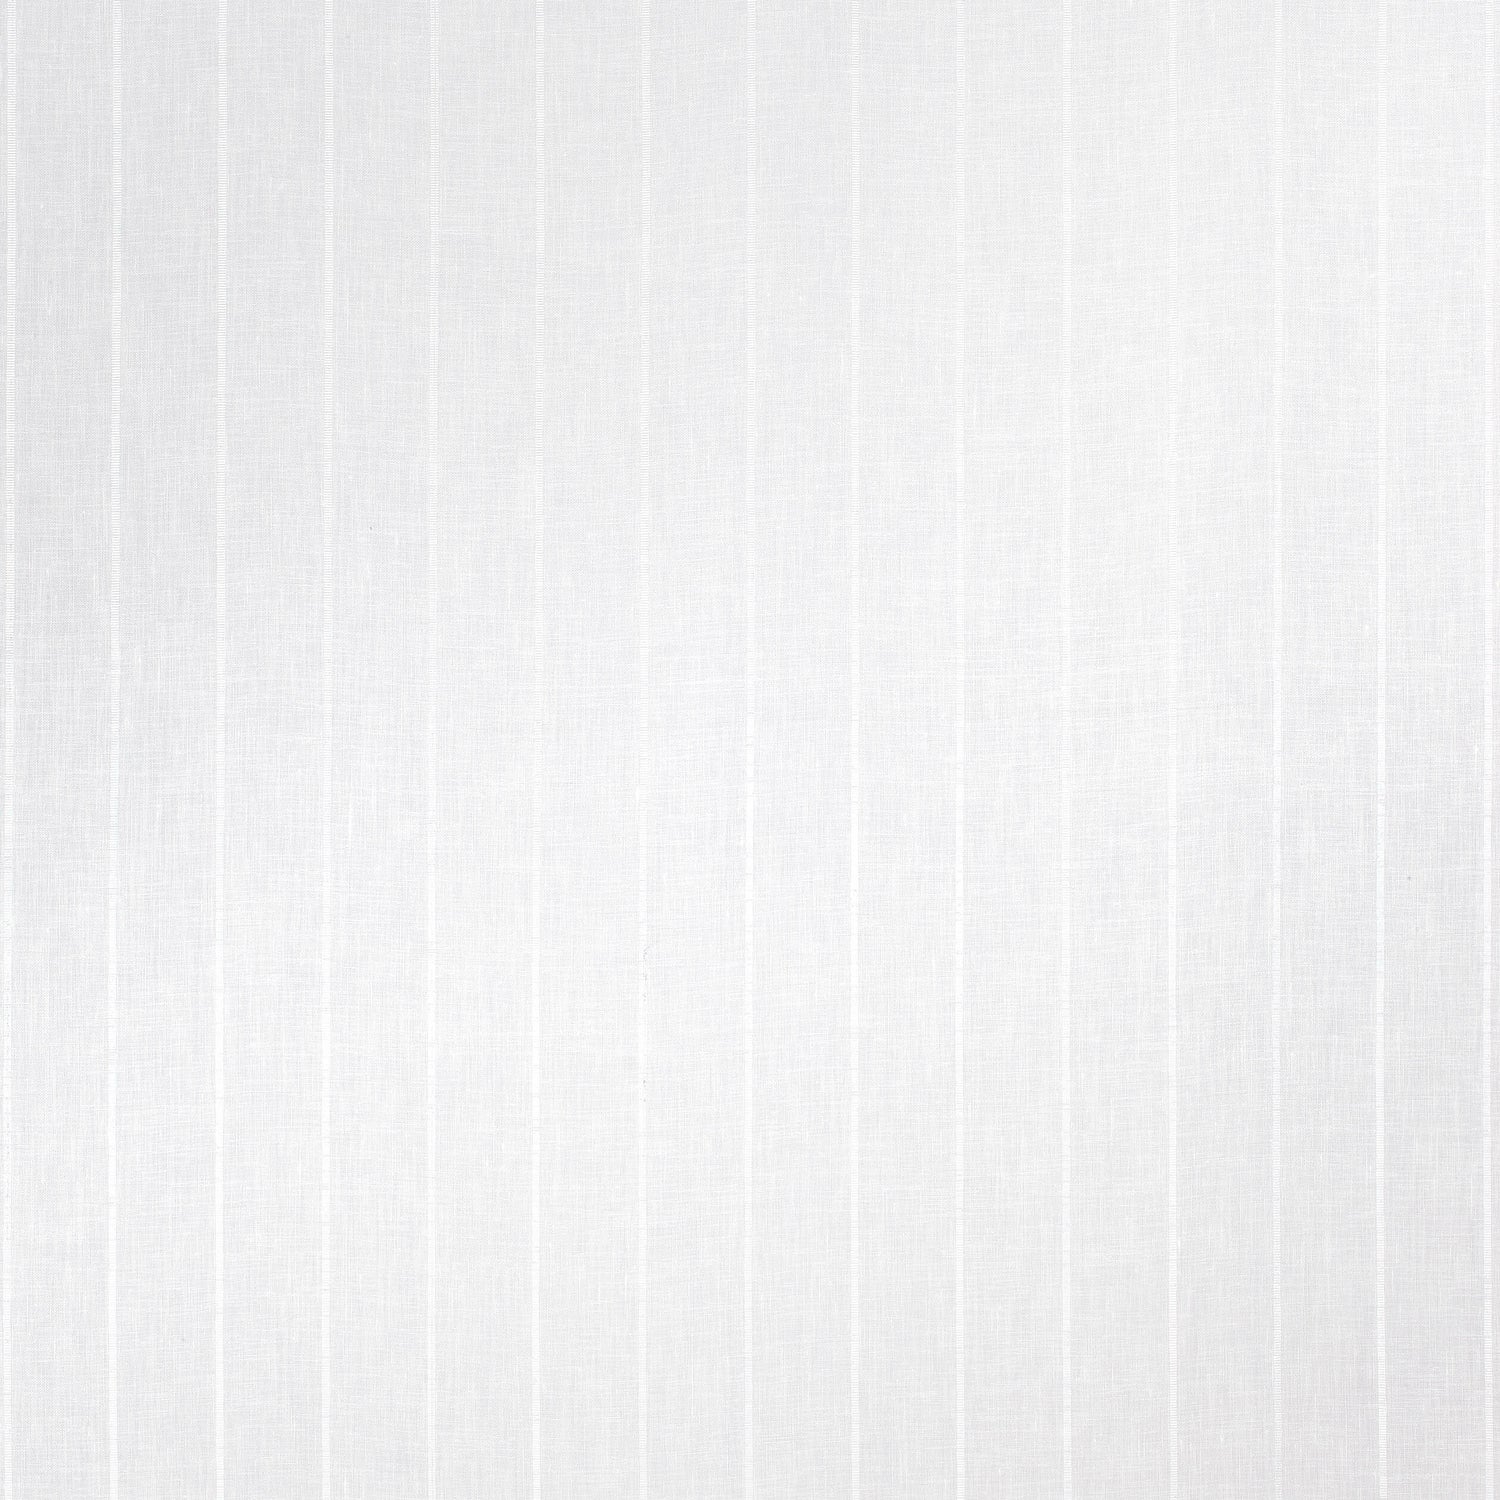 Deco Stripe fabric in white color - pattern number AW9132 - by Anna French in the Natural Glimmer collection